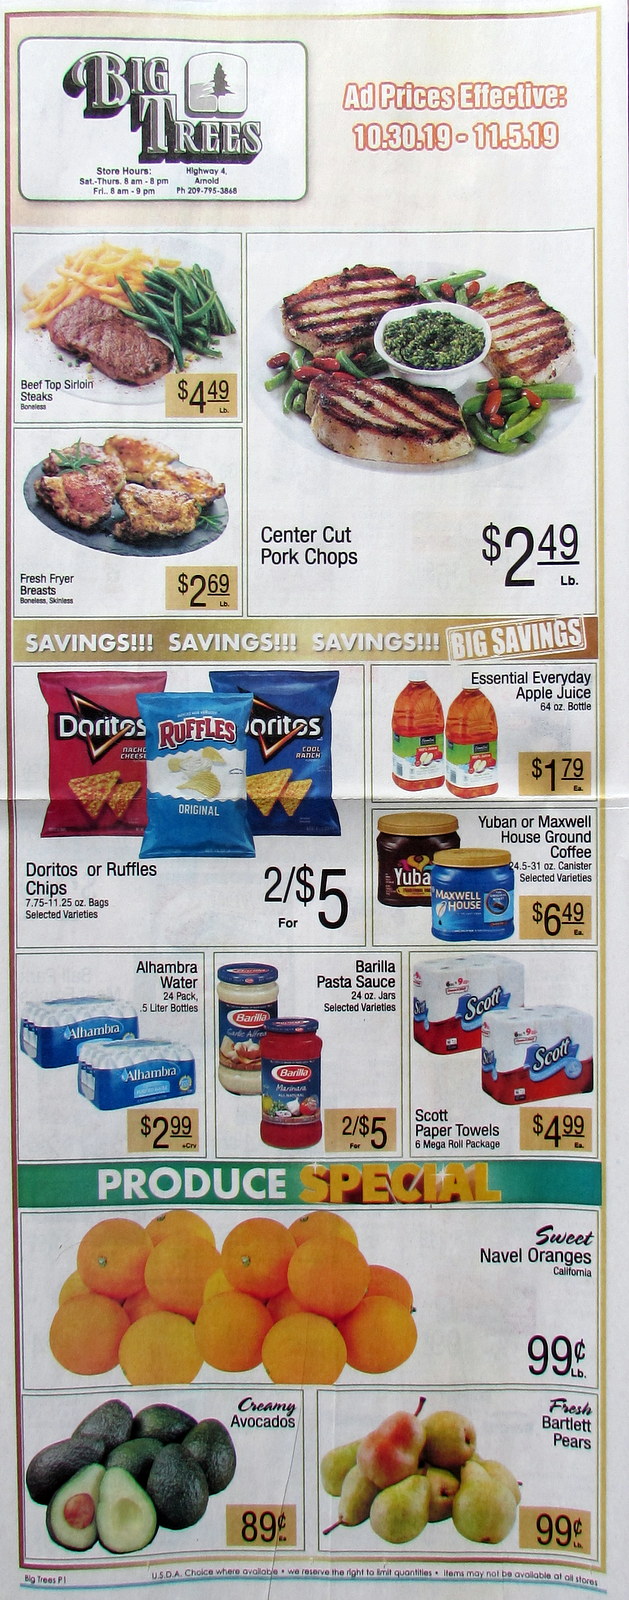 Big Trees Market Weekly Ad & Grocery Specials Through November 5th